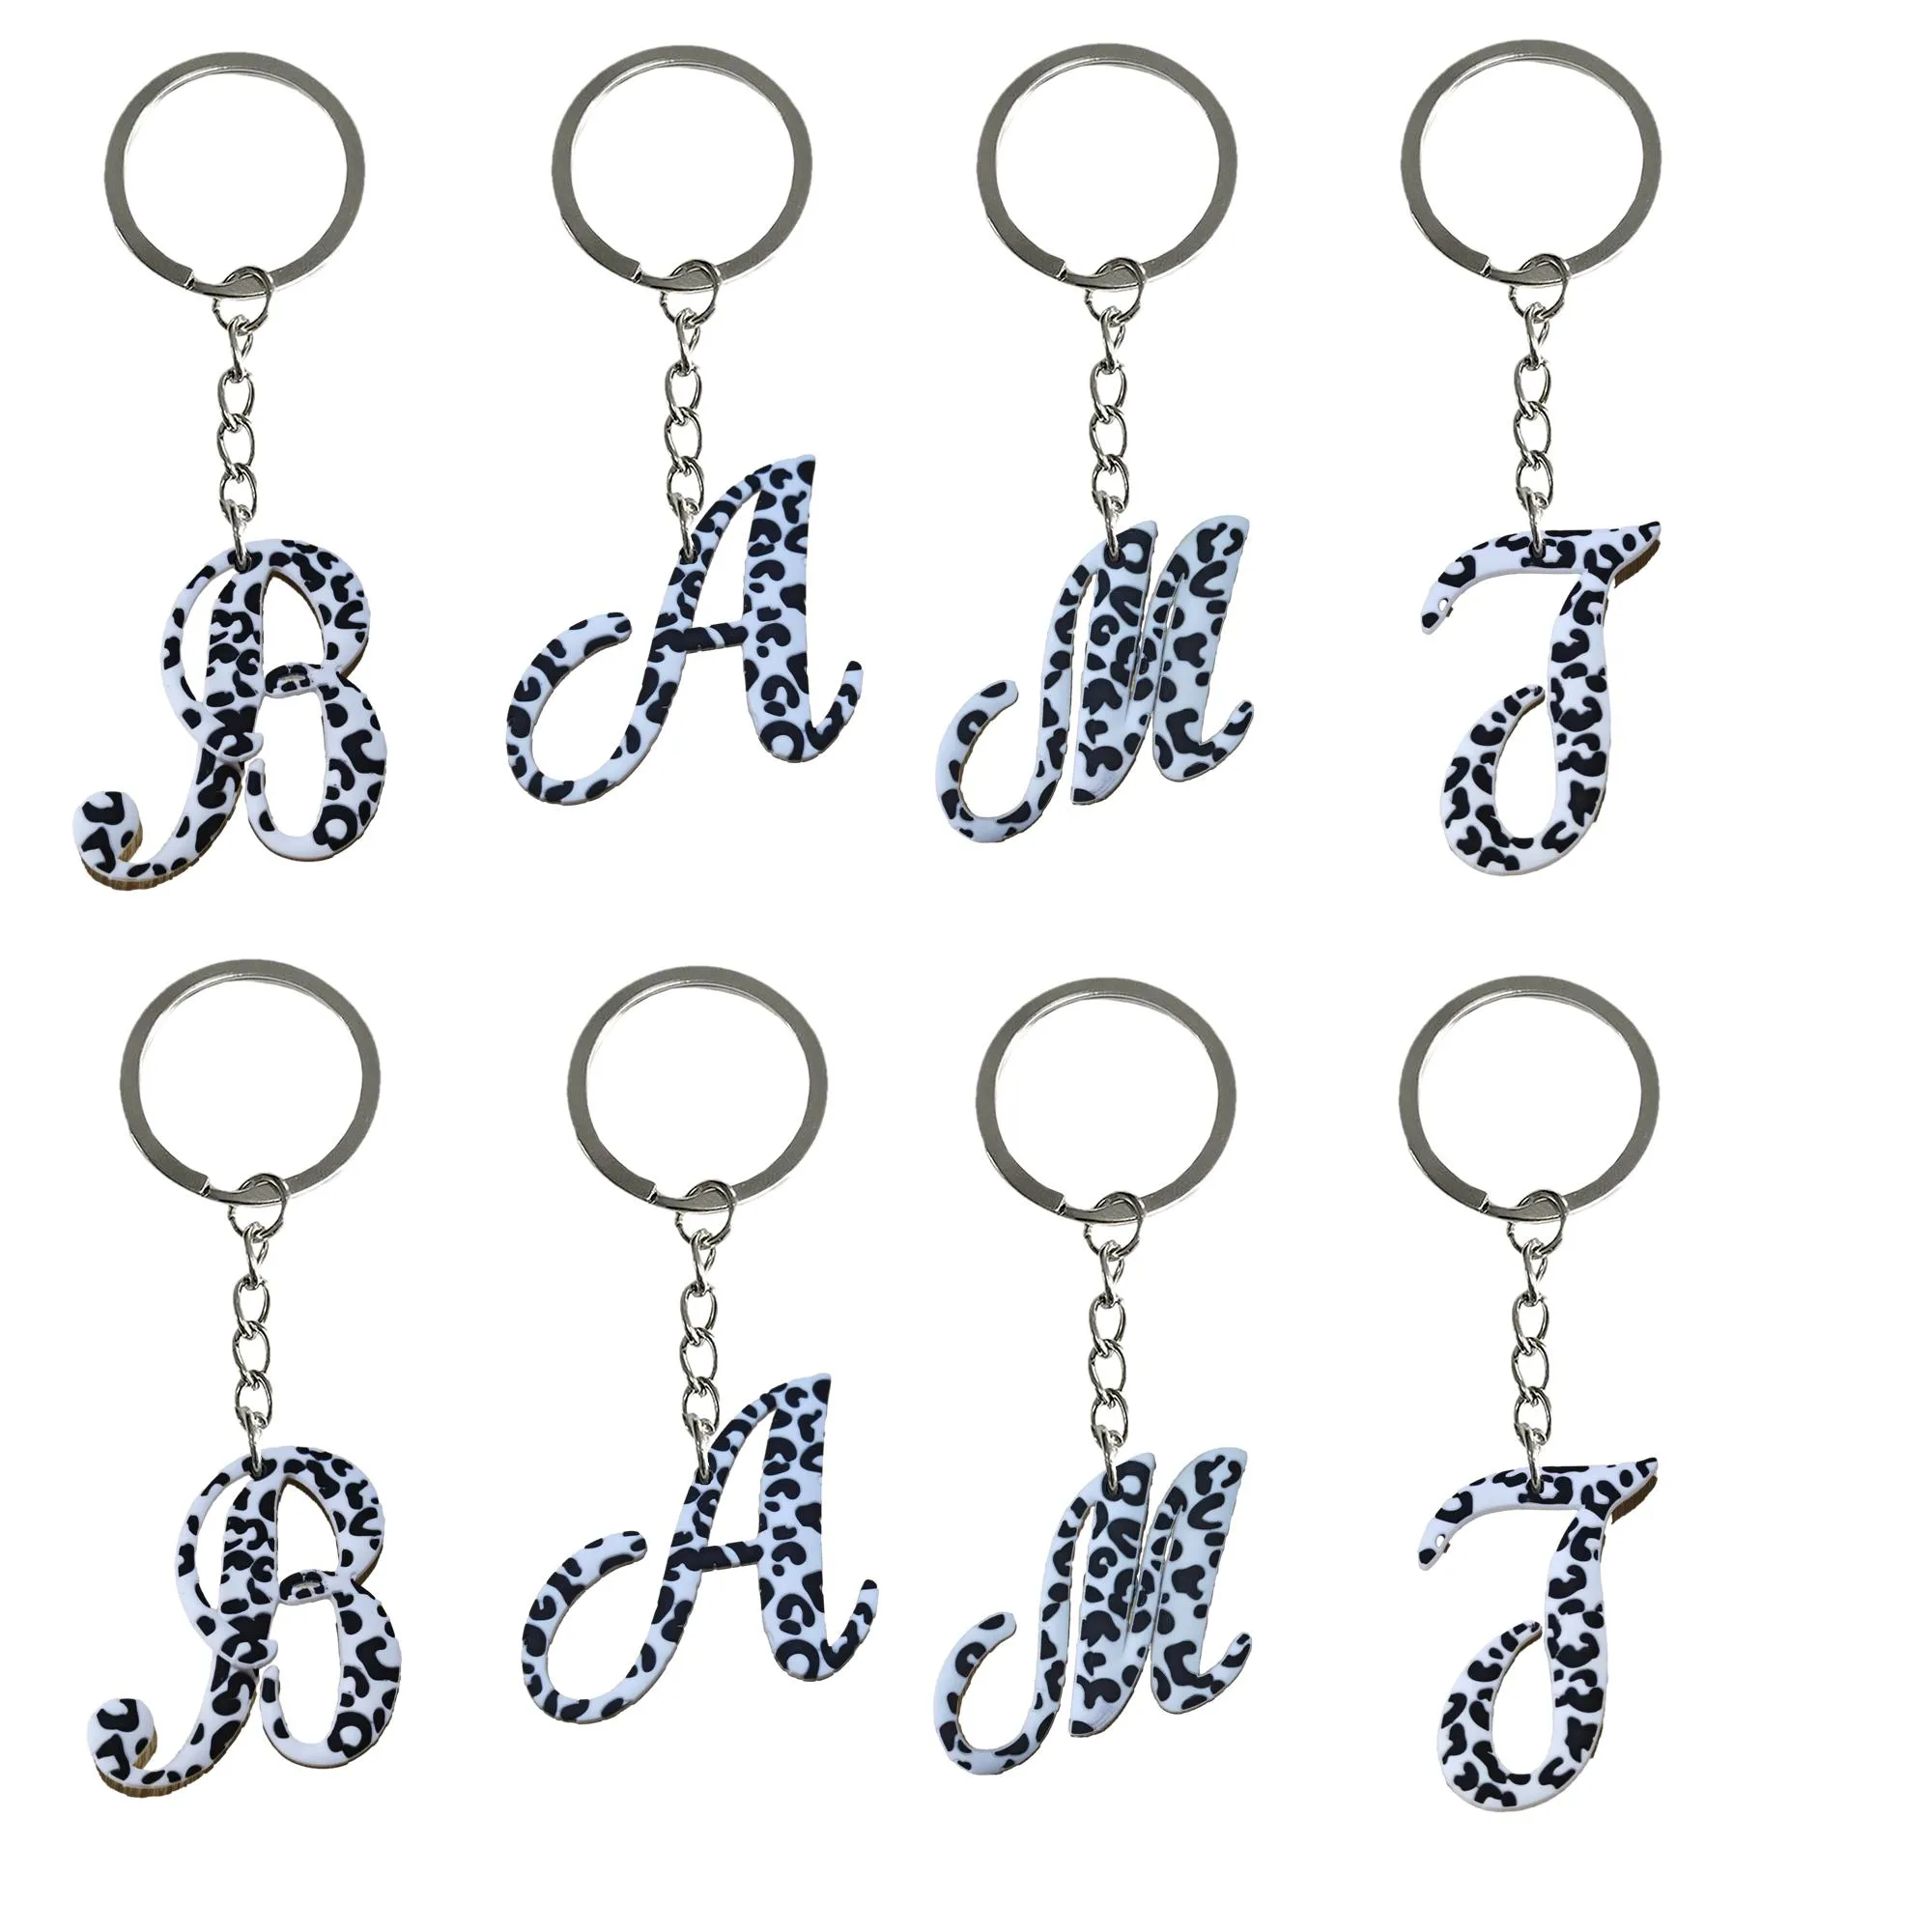 Charms Zebra Large Letters Keychain Keychains Tags Goodie Bag Stuffer Christmas Gifts And Holiday Key Chain Ring Gift For Fans Keyring Otpof